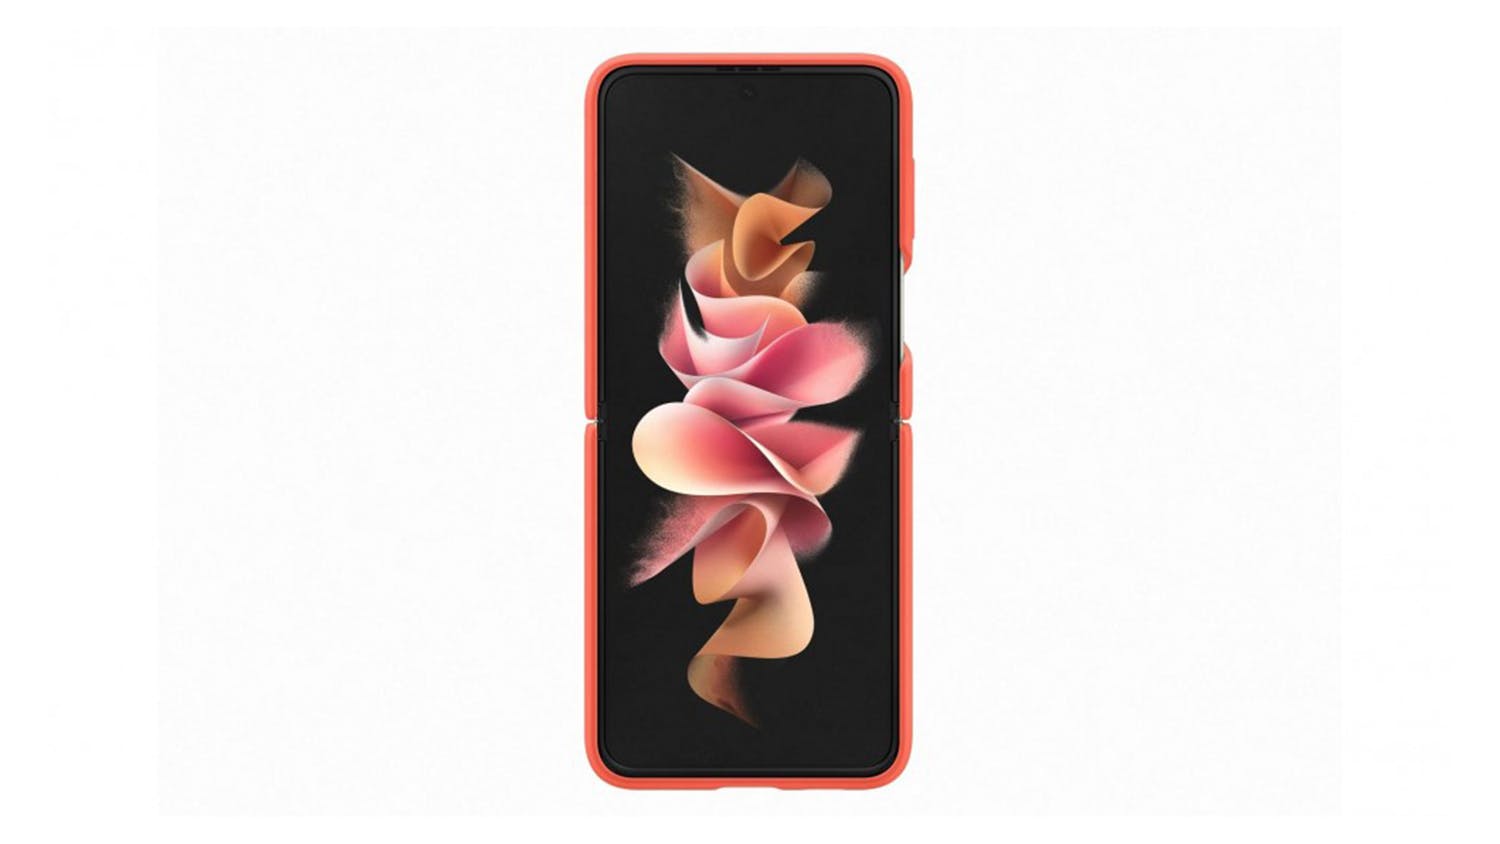 Samsung Silicone Ring Cover for Samsung Z Flip3 - Coral